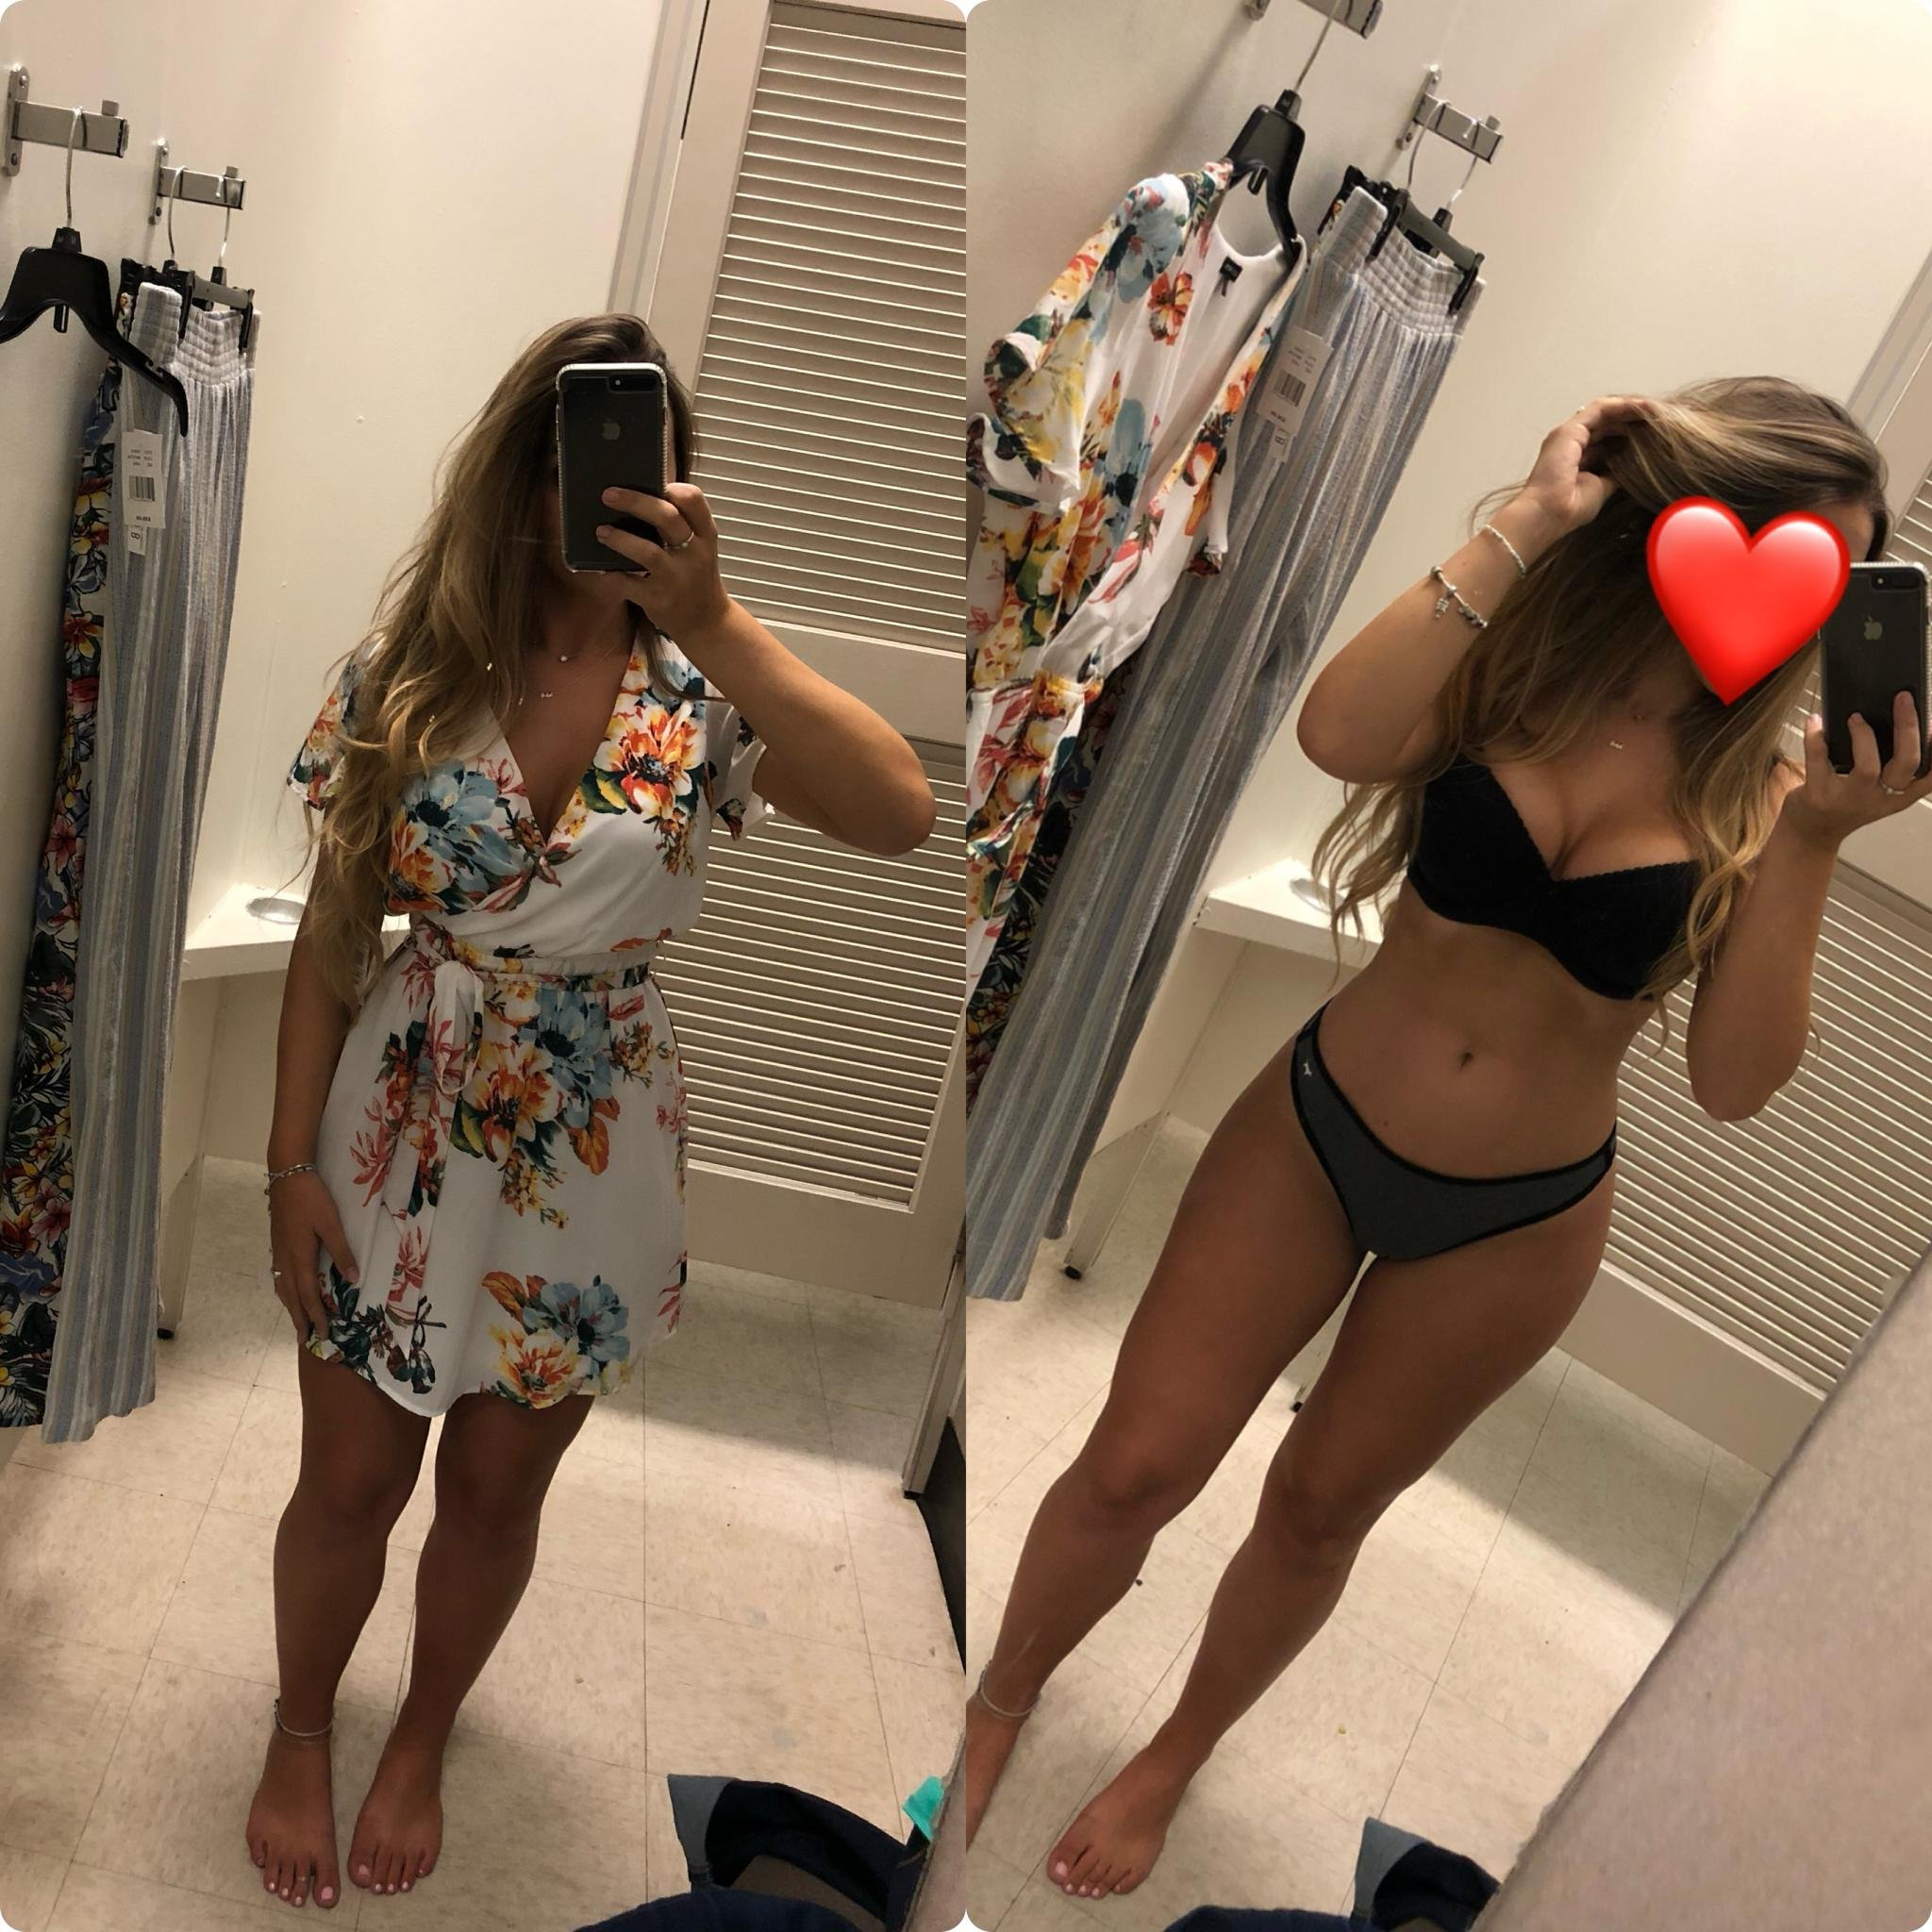 Swimsuit changing room compilation